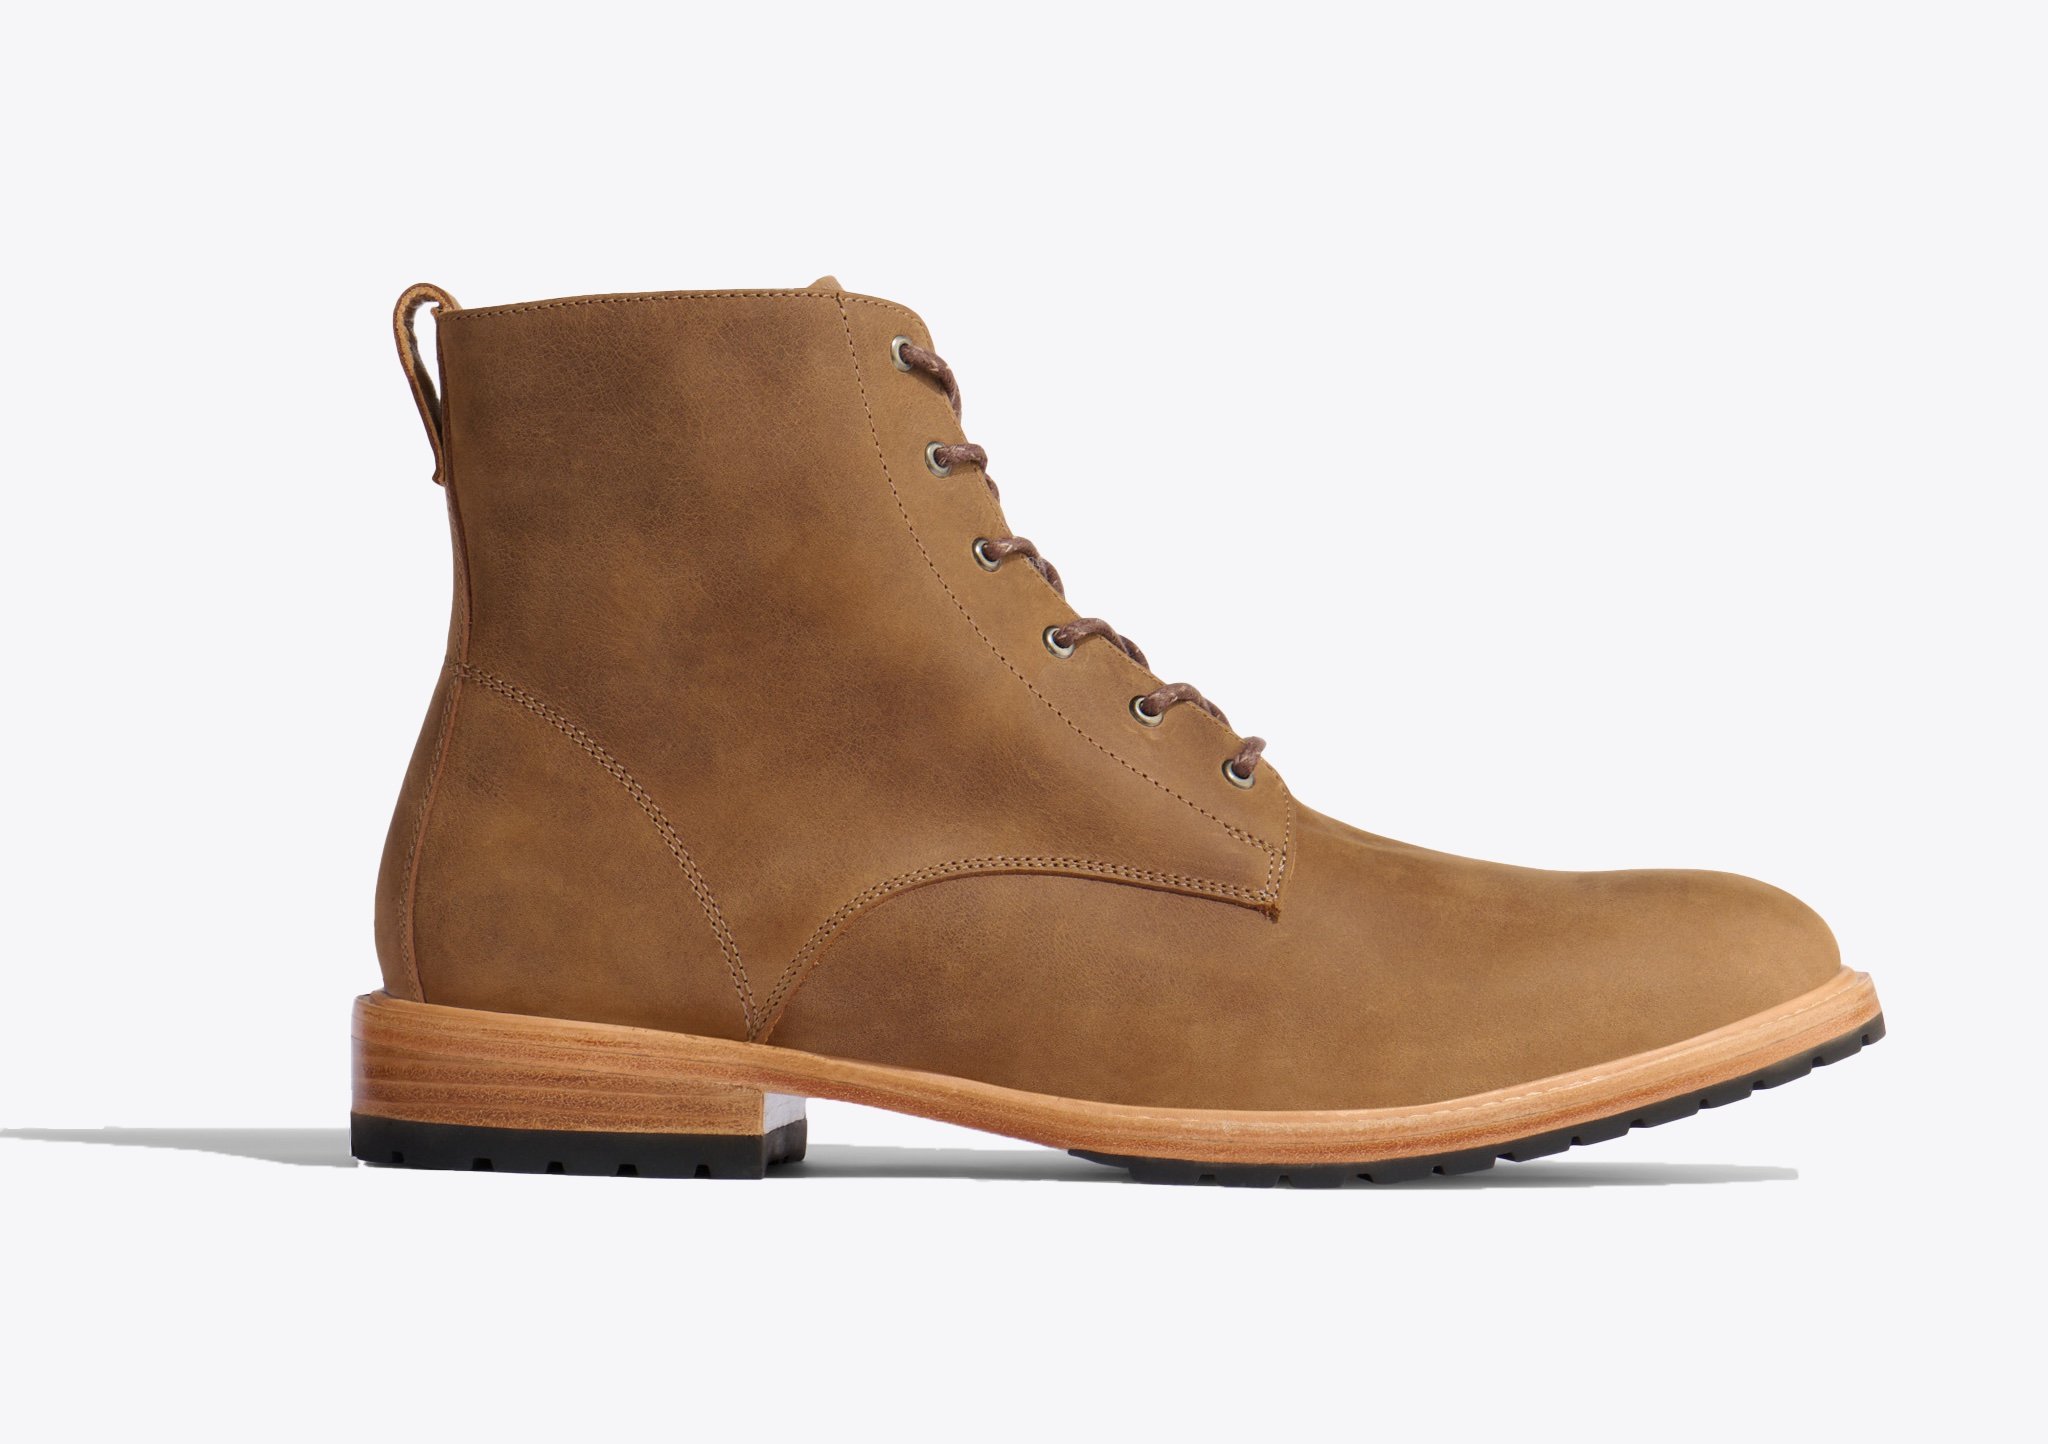 Nisolo Martin All-Weather Boot Tobacco - Every Nisolo product is built on the foundation of comfort, function, and design. 